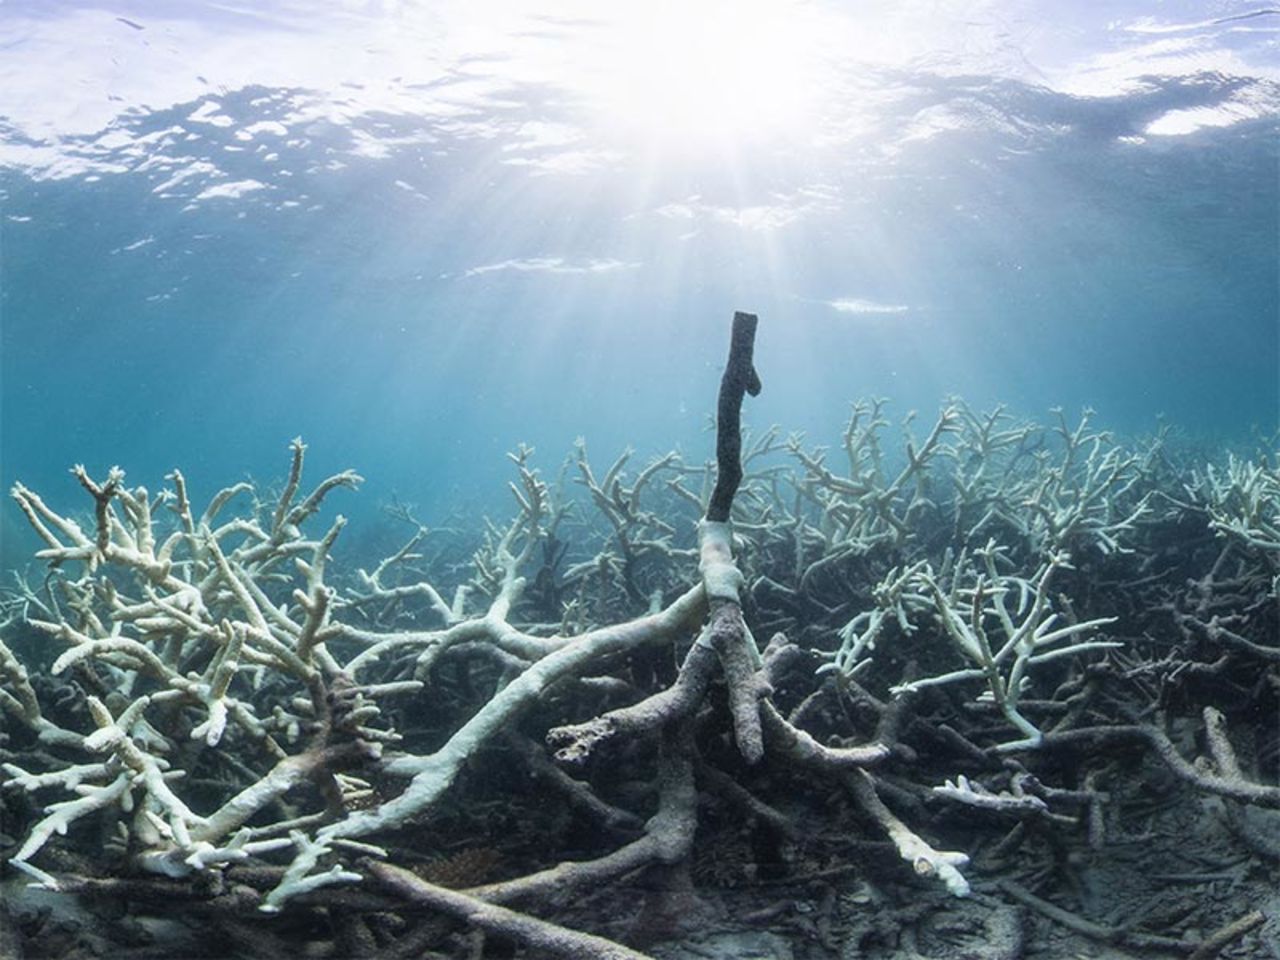 Some of the bleaching of reefs in the northern section has been described as "extreme."